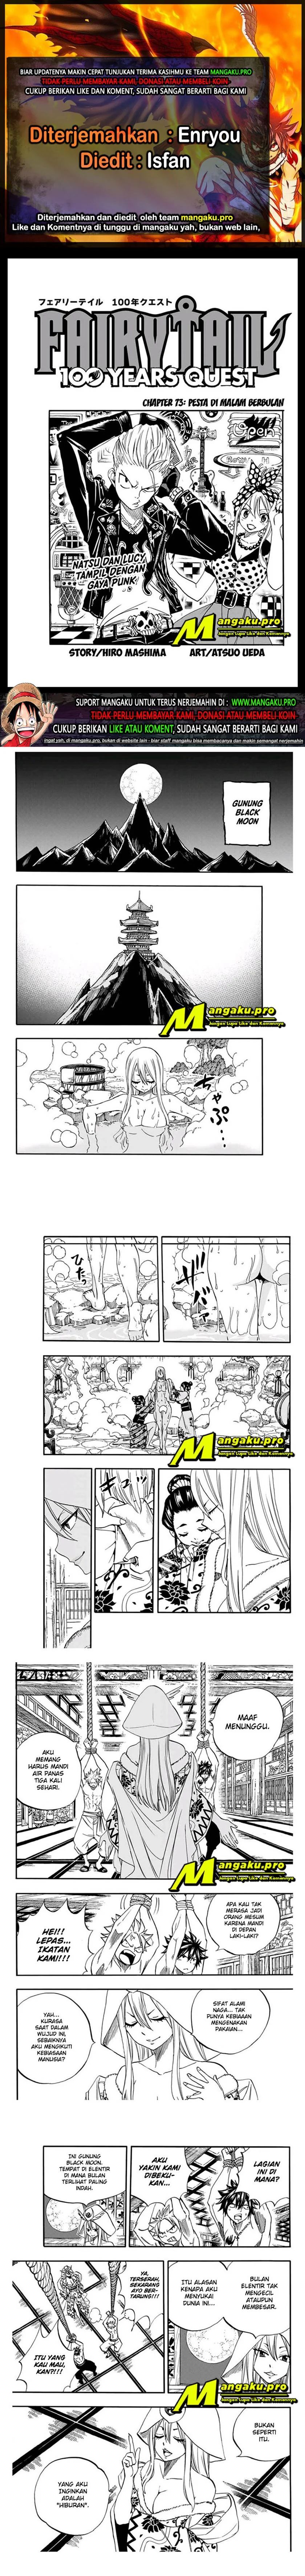 Fairy Tail: 100 Years Quest: Chapter 73 - Page 1